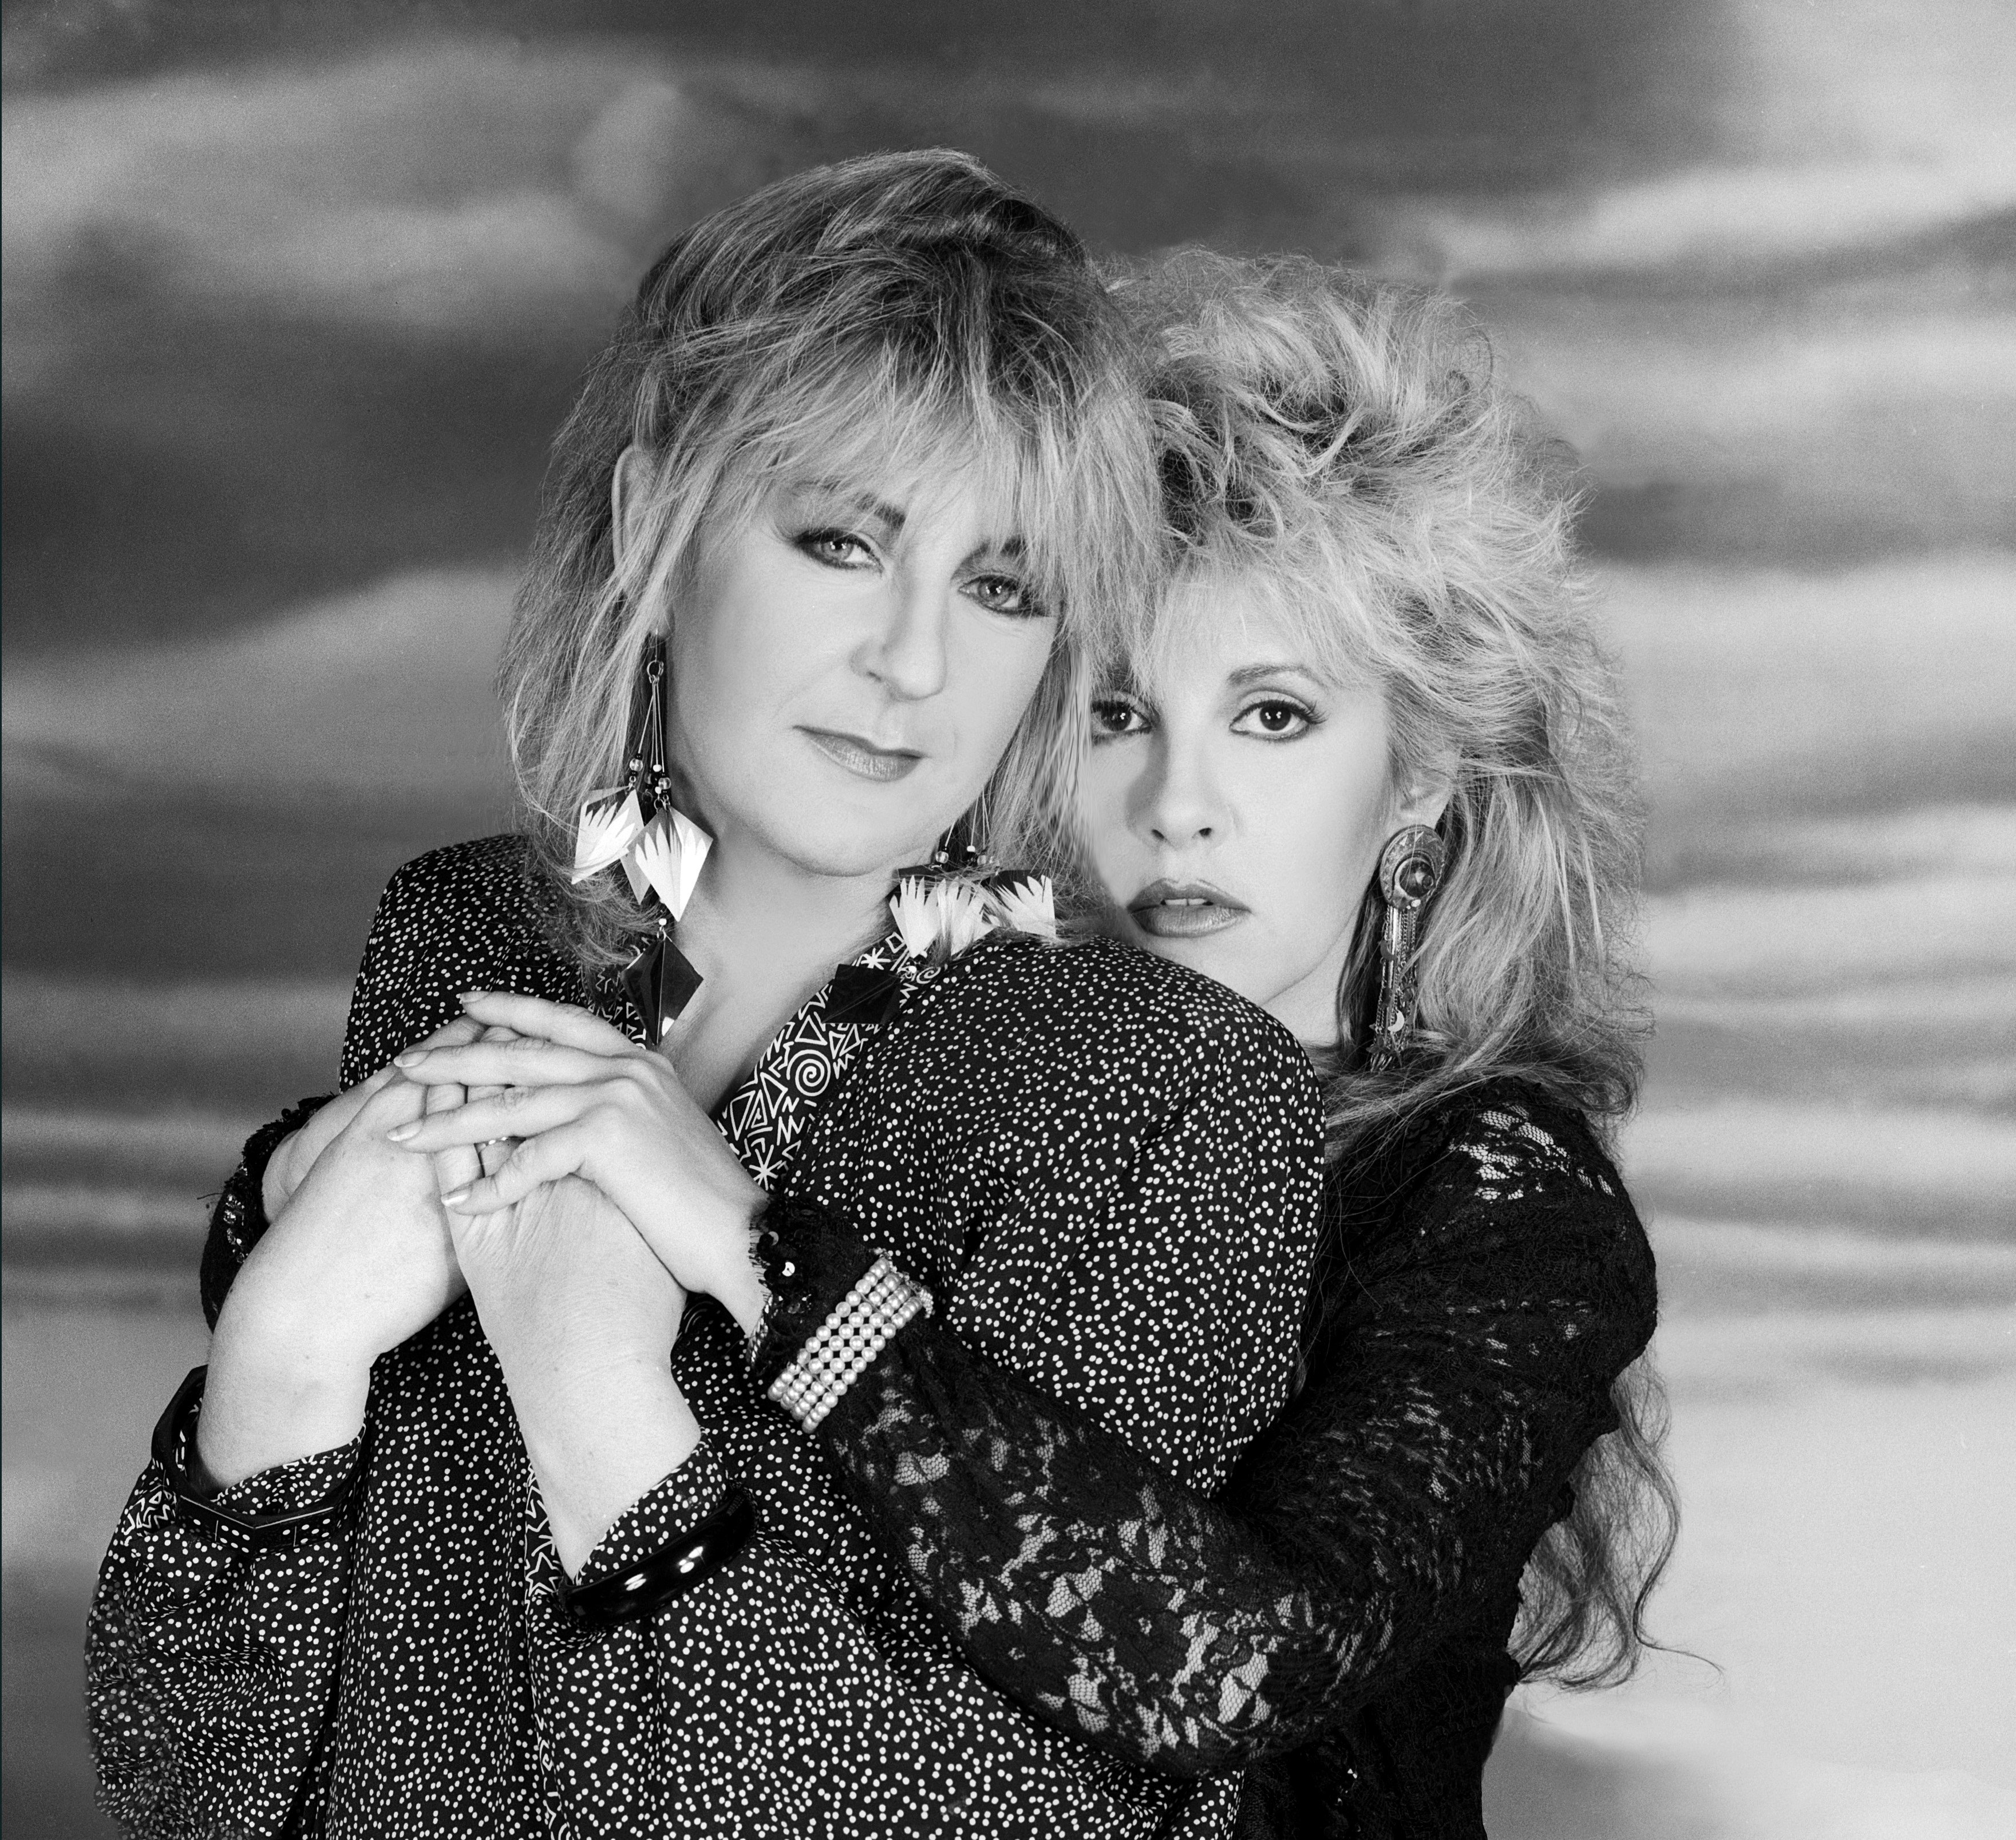 A black and white photo of Stevie Nicks embracing Christine McVie from behind.